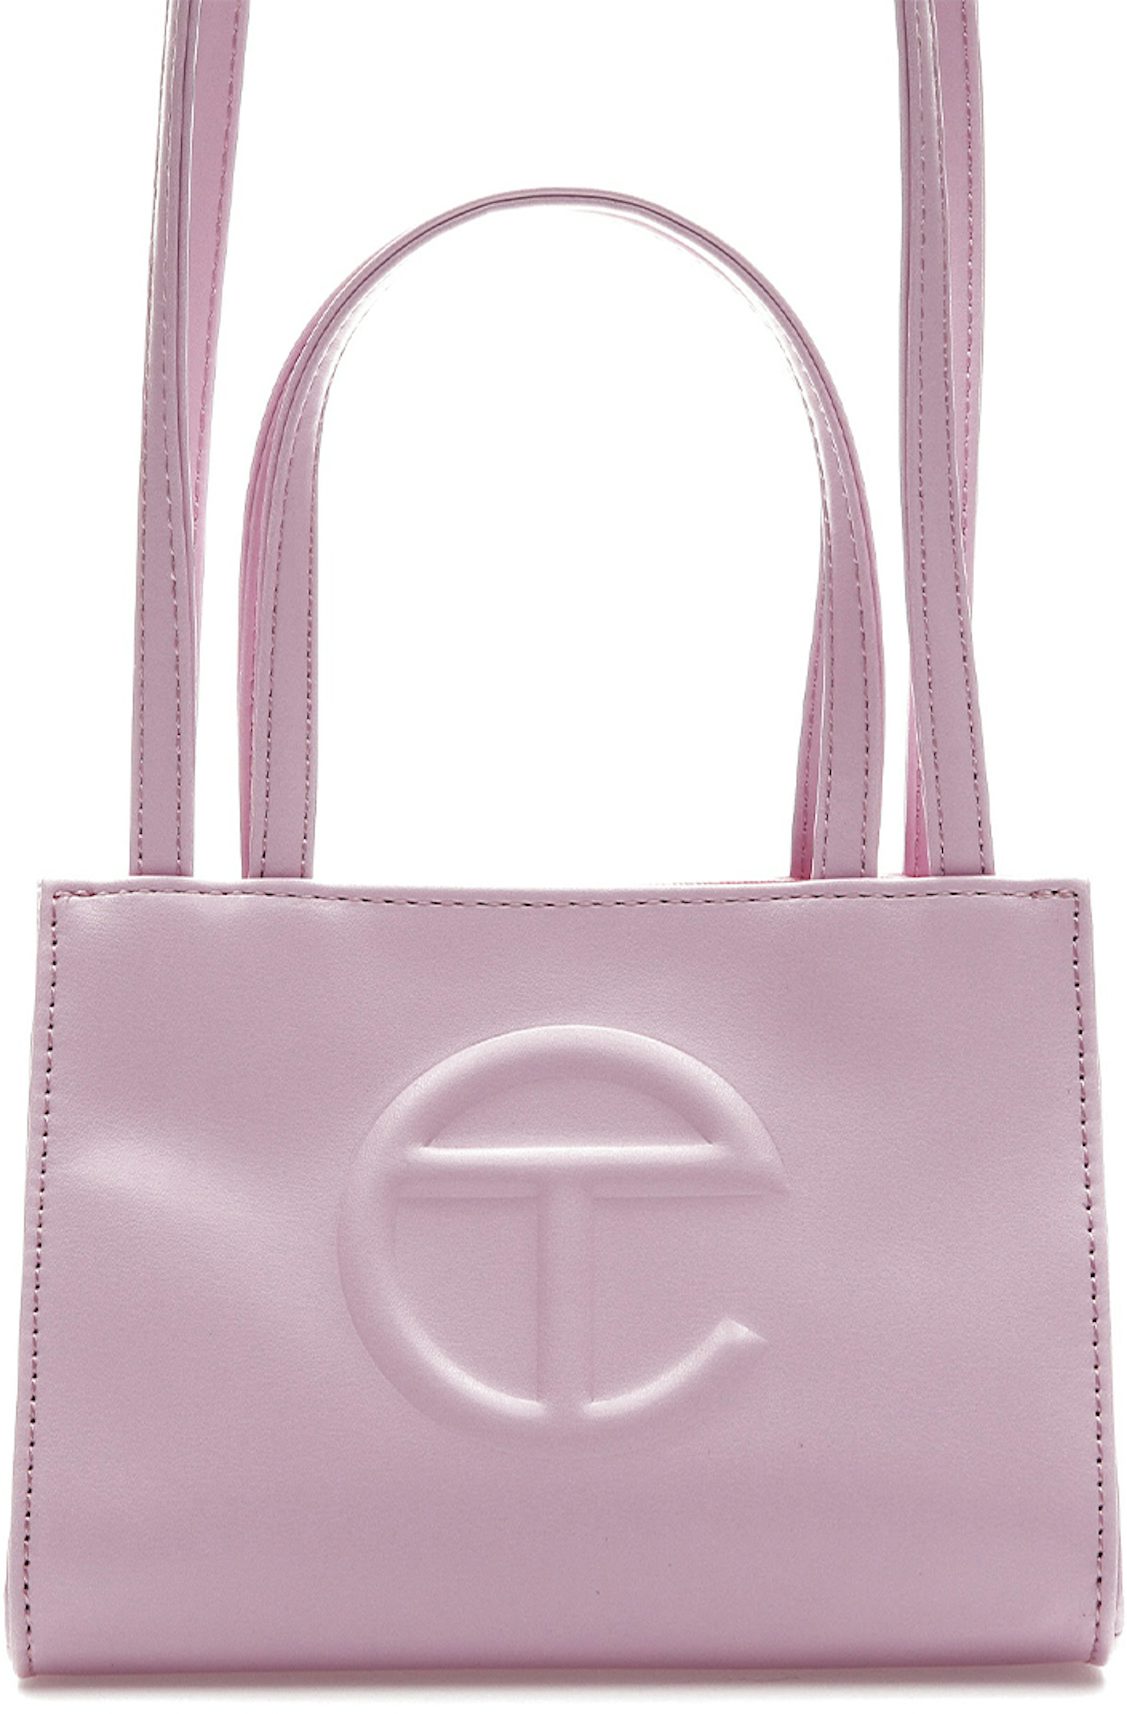 Telfar Releases a Hot Pink Version of Its Shopping Bag